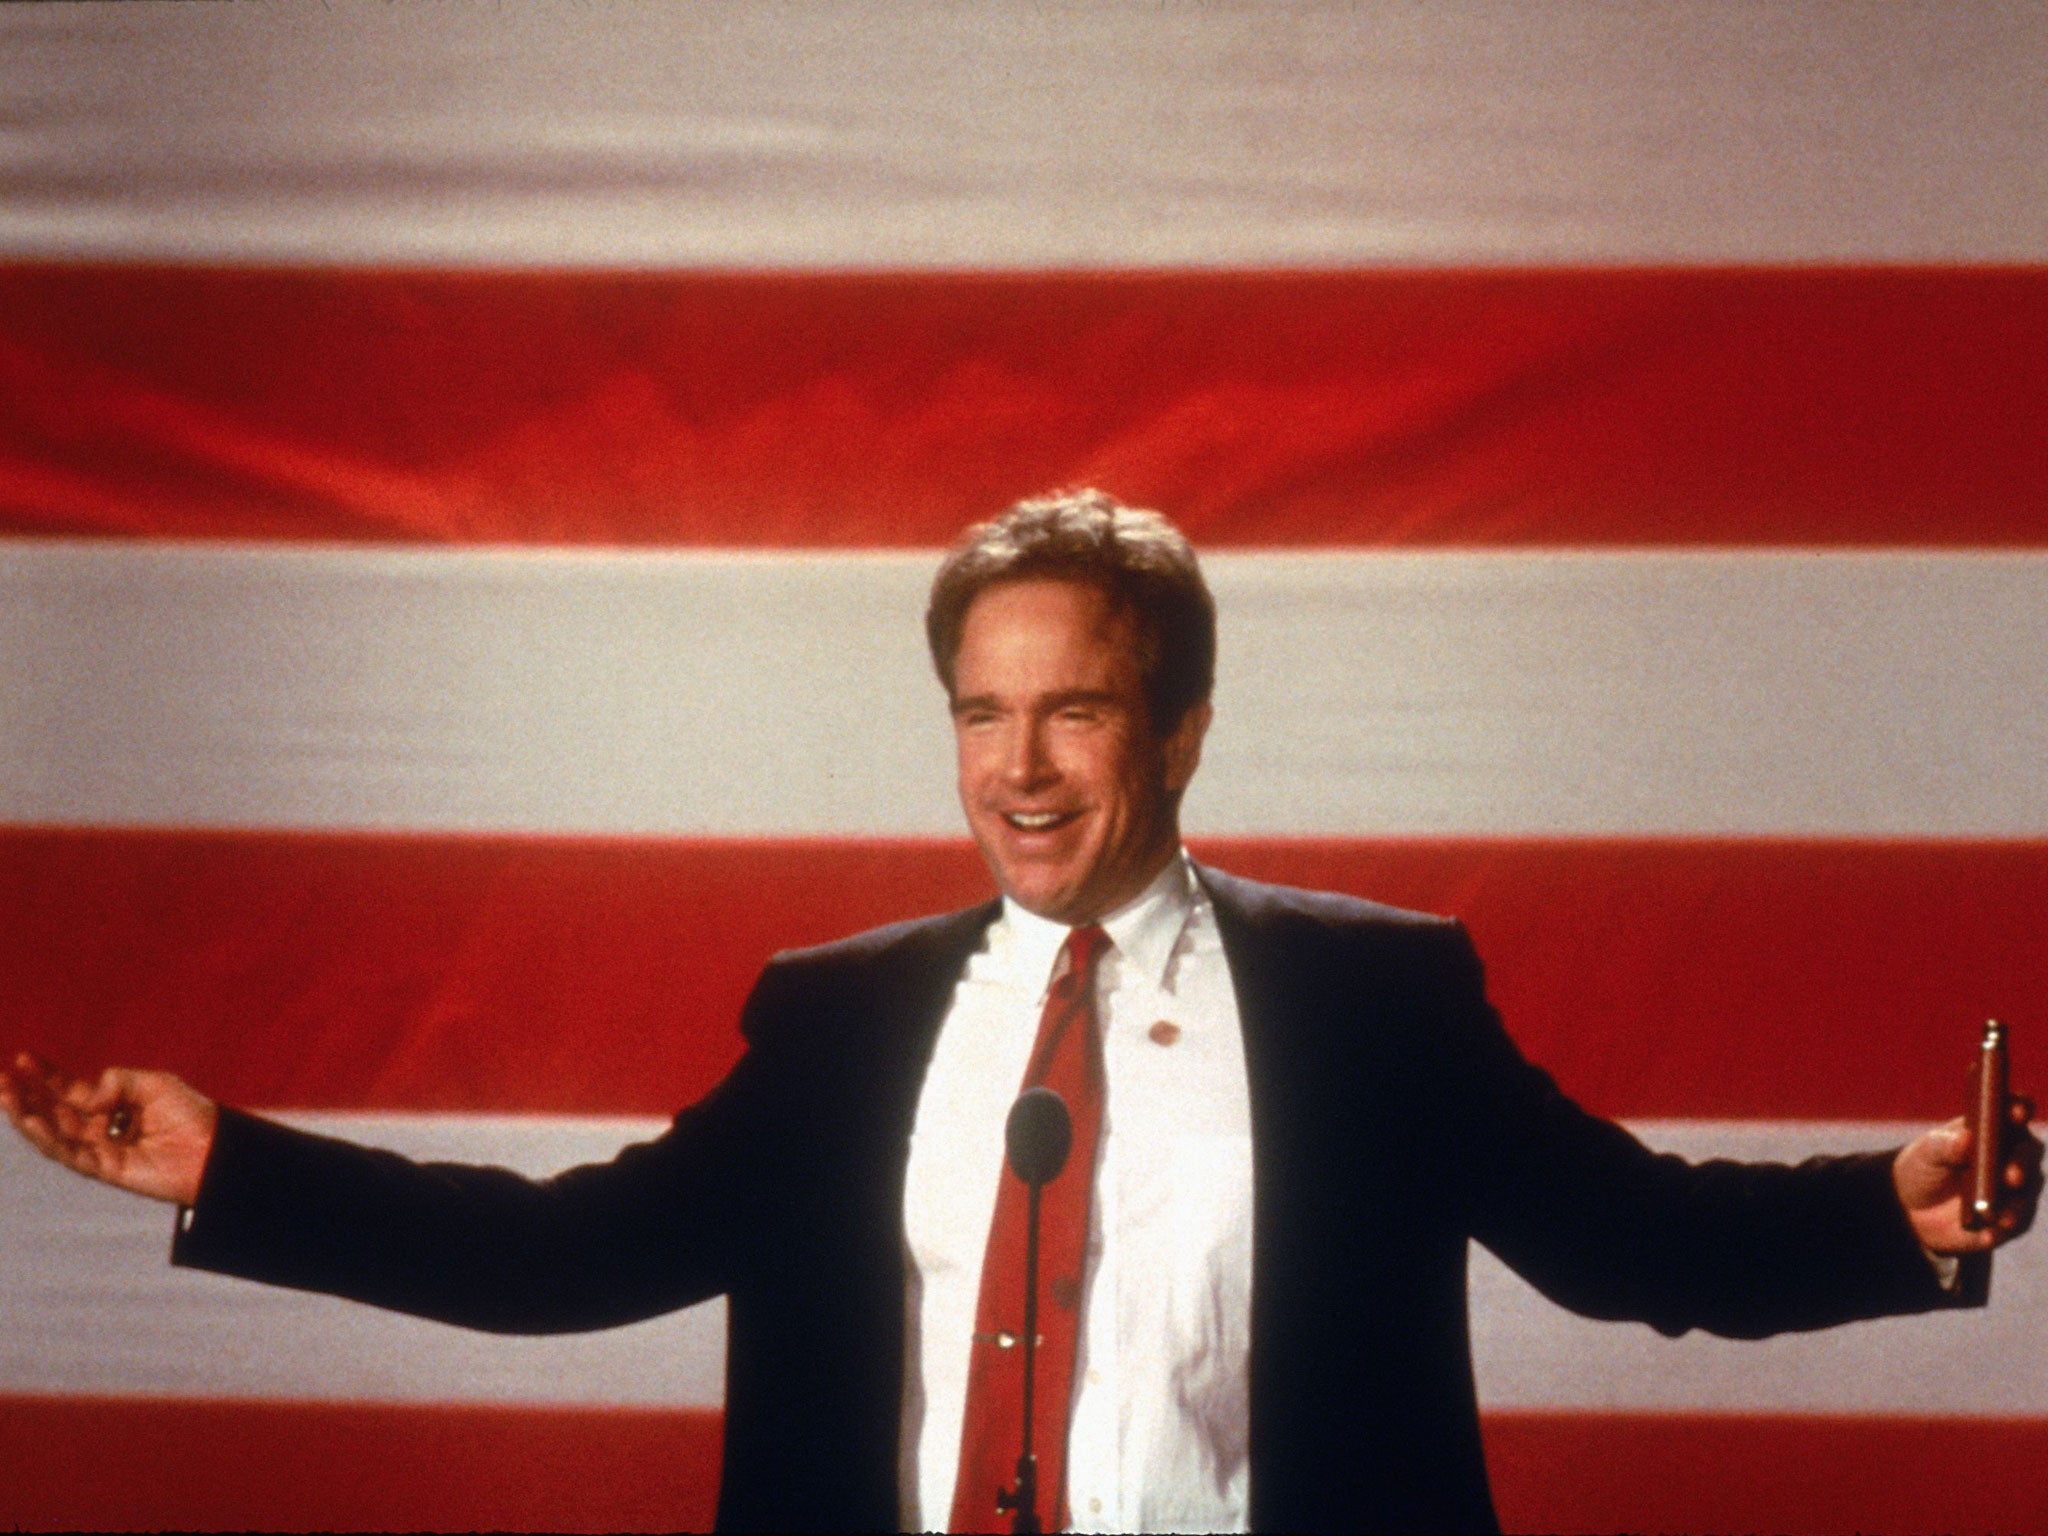 A still from the 1998 movie 'Bulworth' starring Warren Beatty